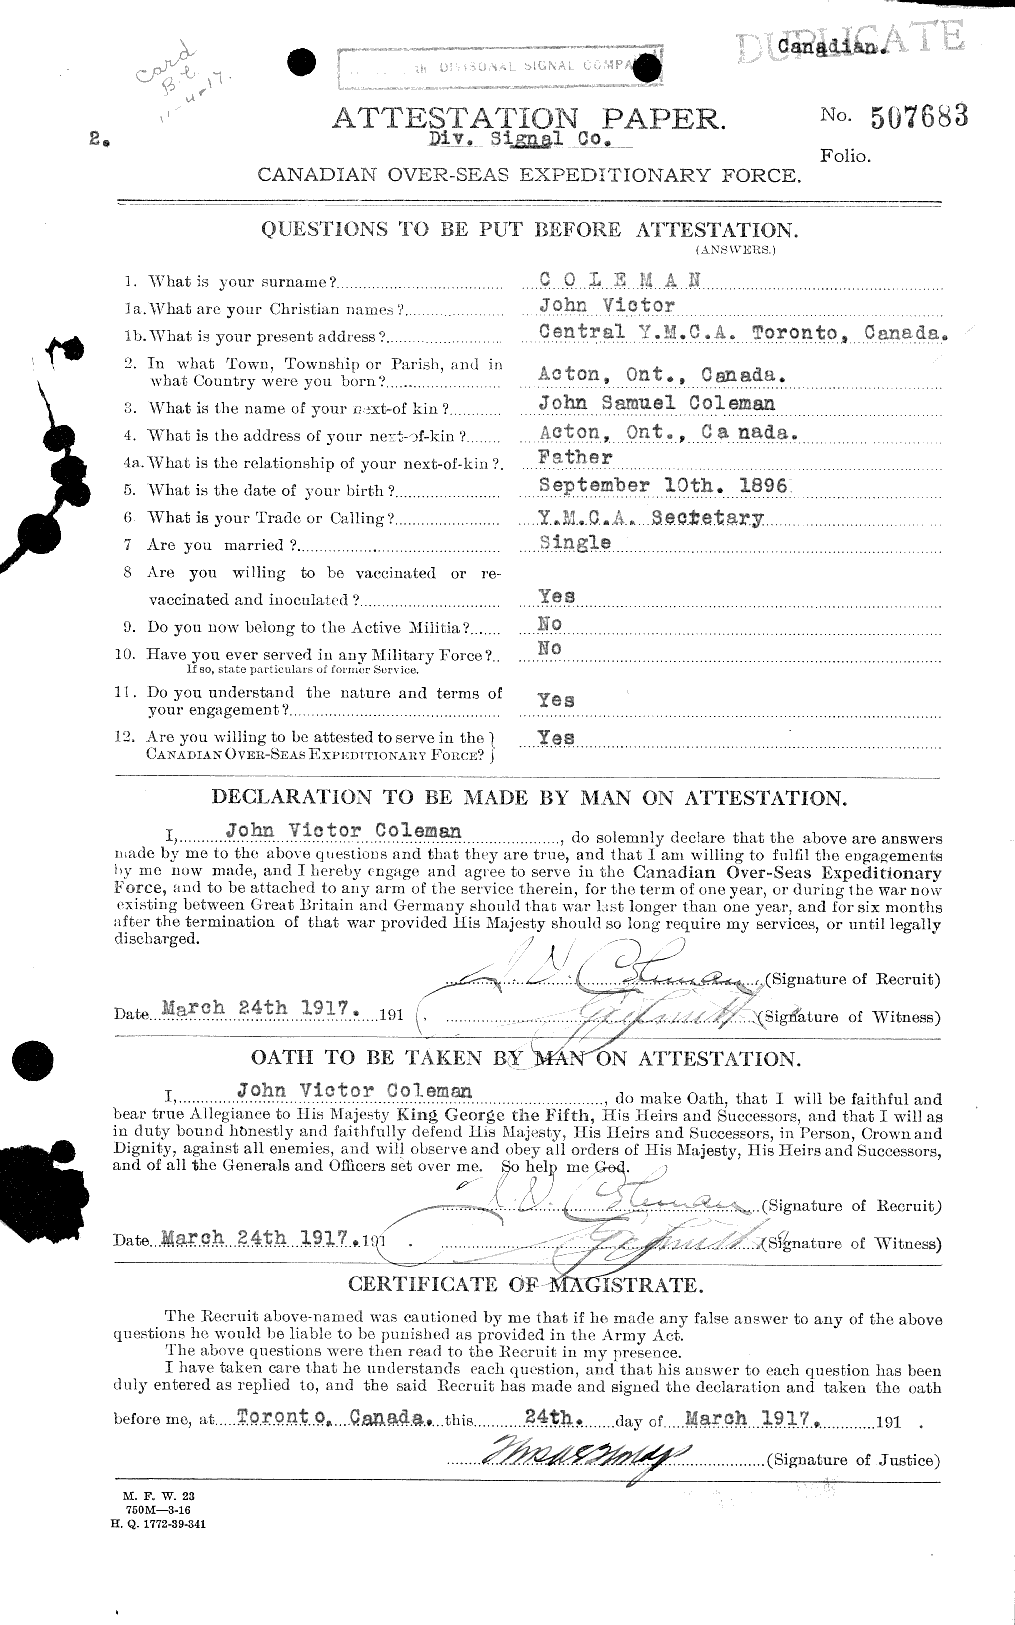 Personnel Records of the First World War - CEF 028221a